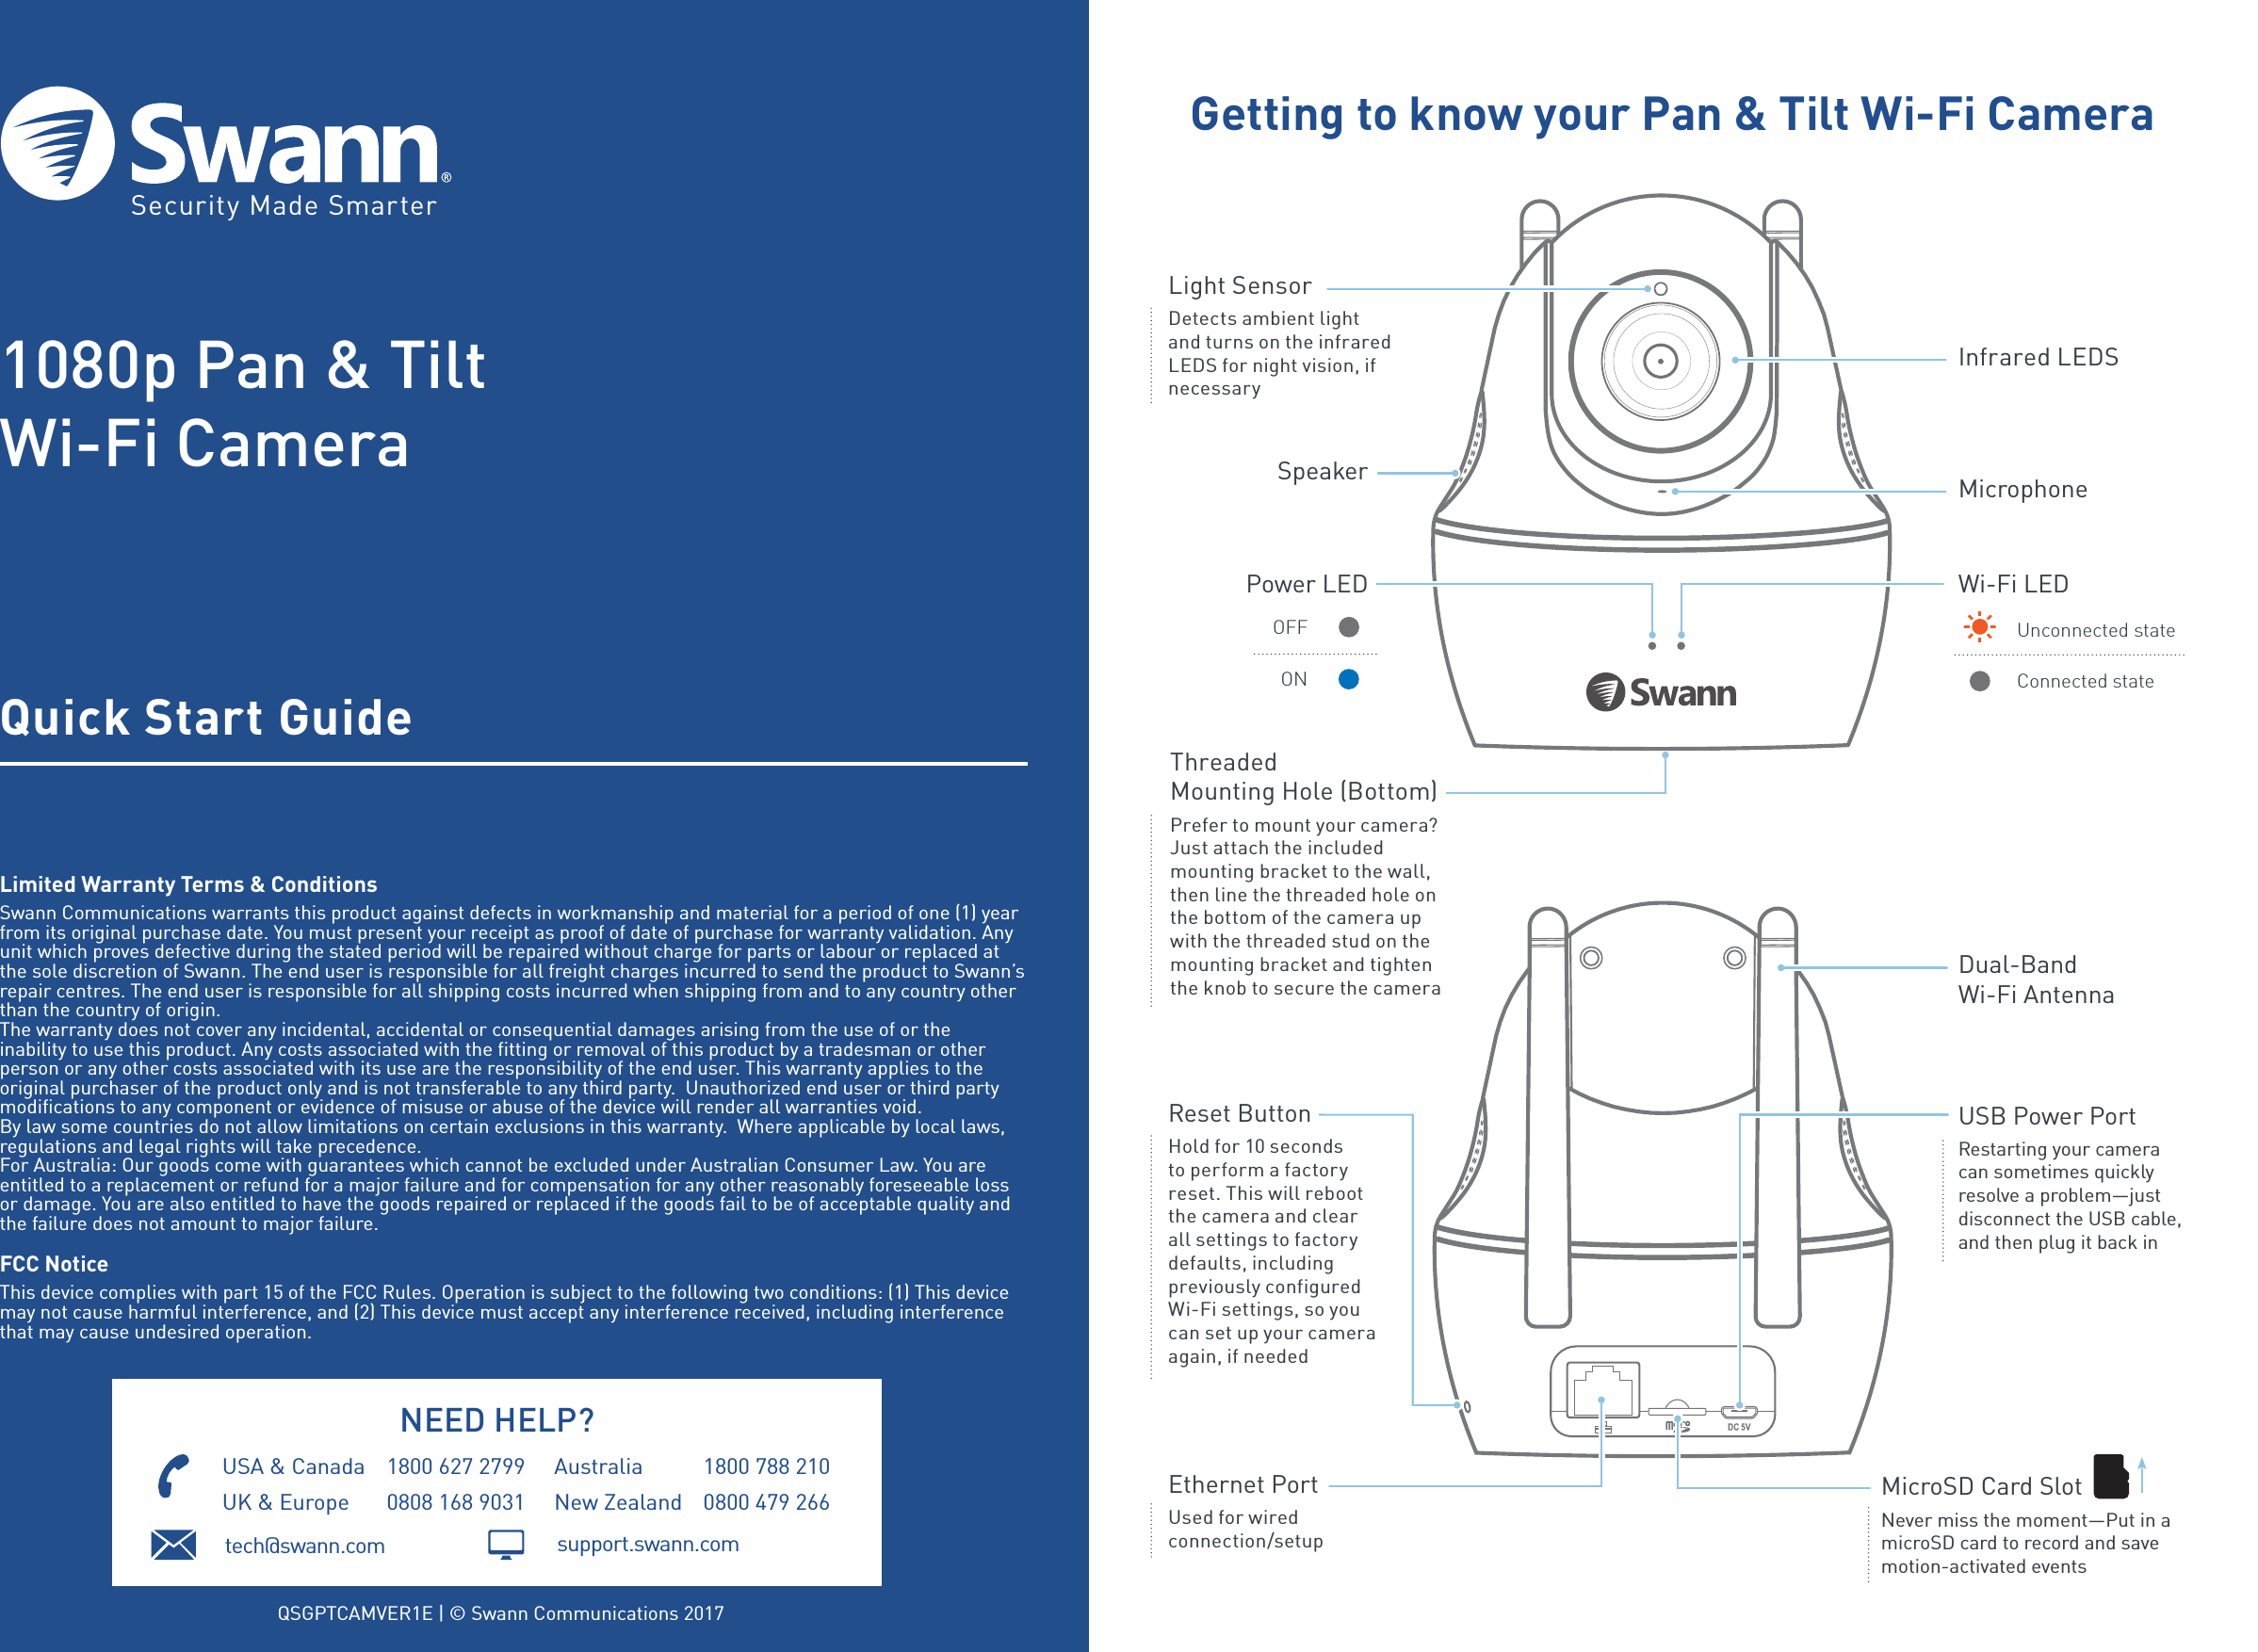 Page 1 of 2 - Swann 1080p Pan & Tilt Wi-Fi Camera Quick Start Guide  SWN-SWWHD-PTCAM-AU